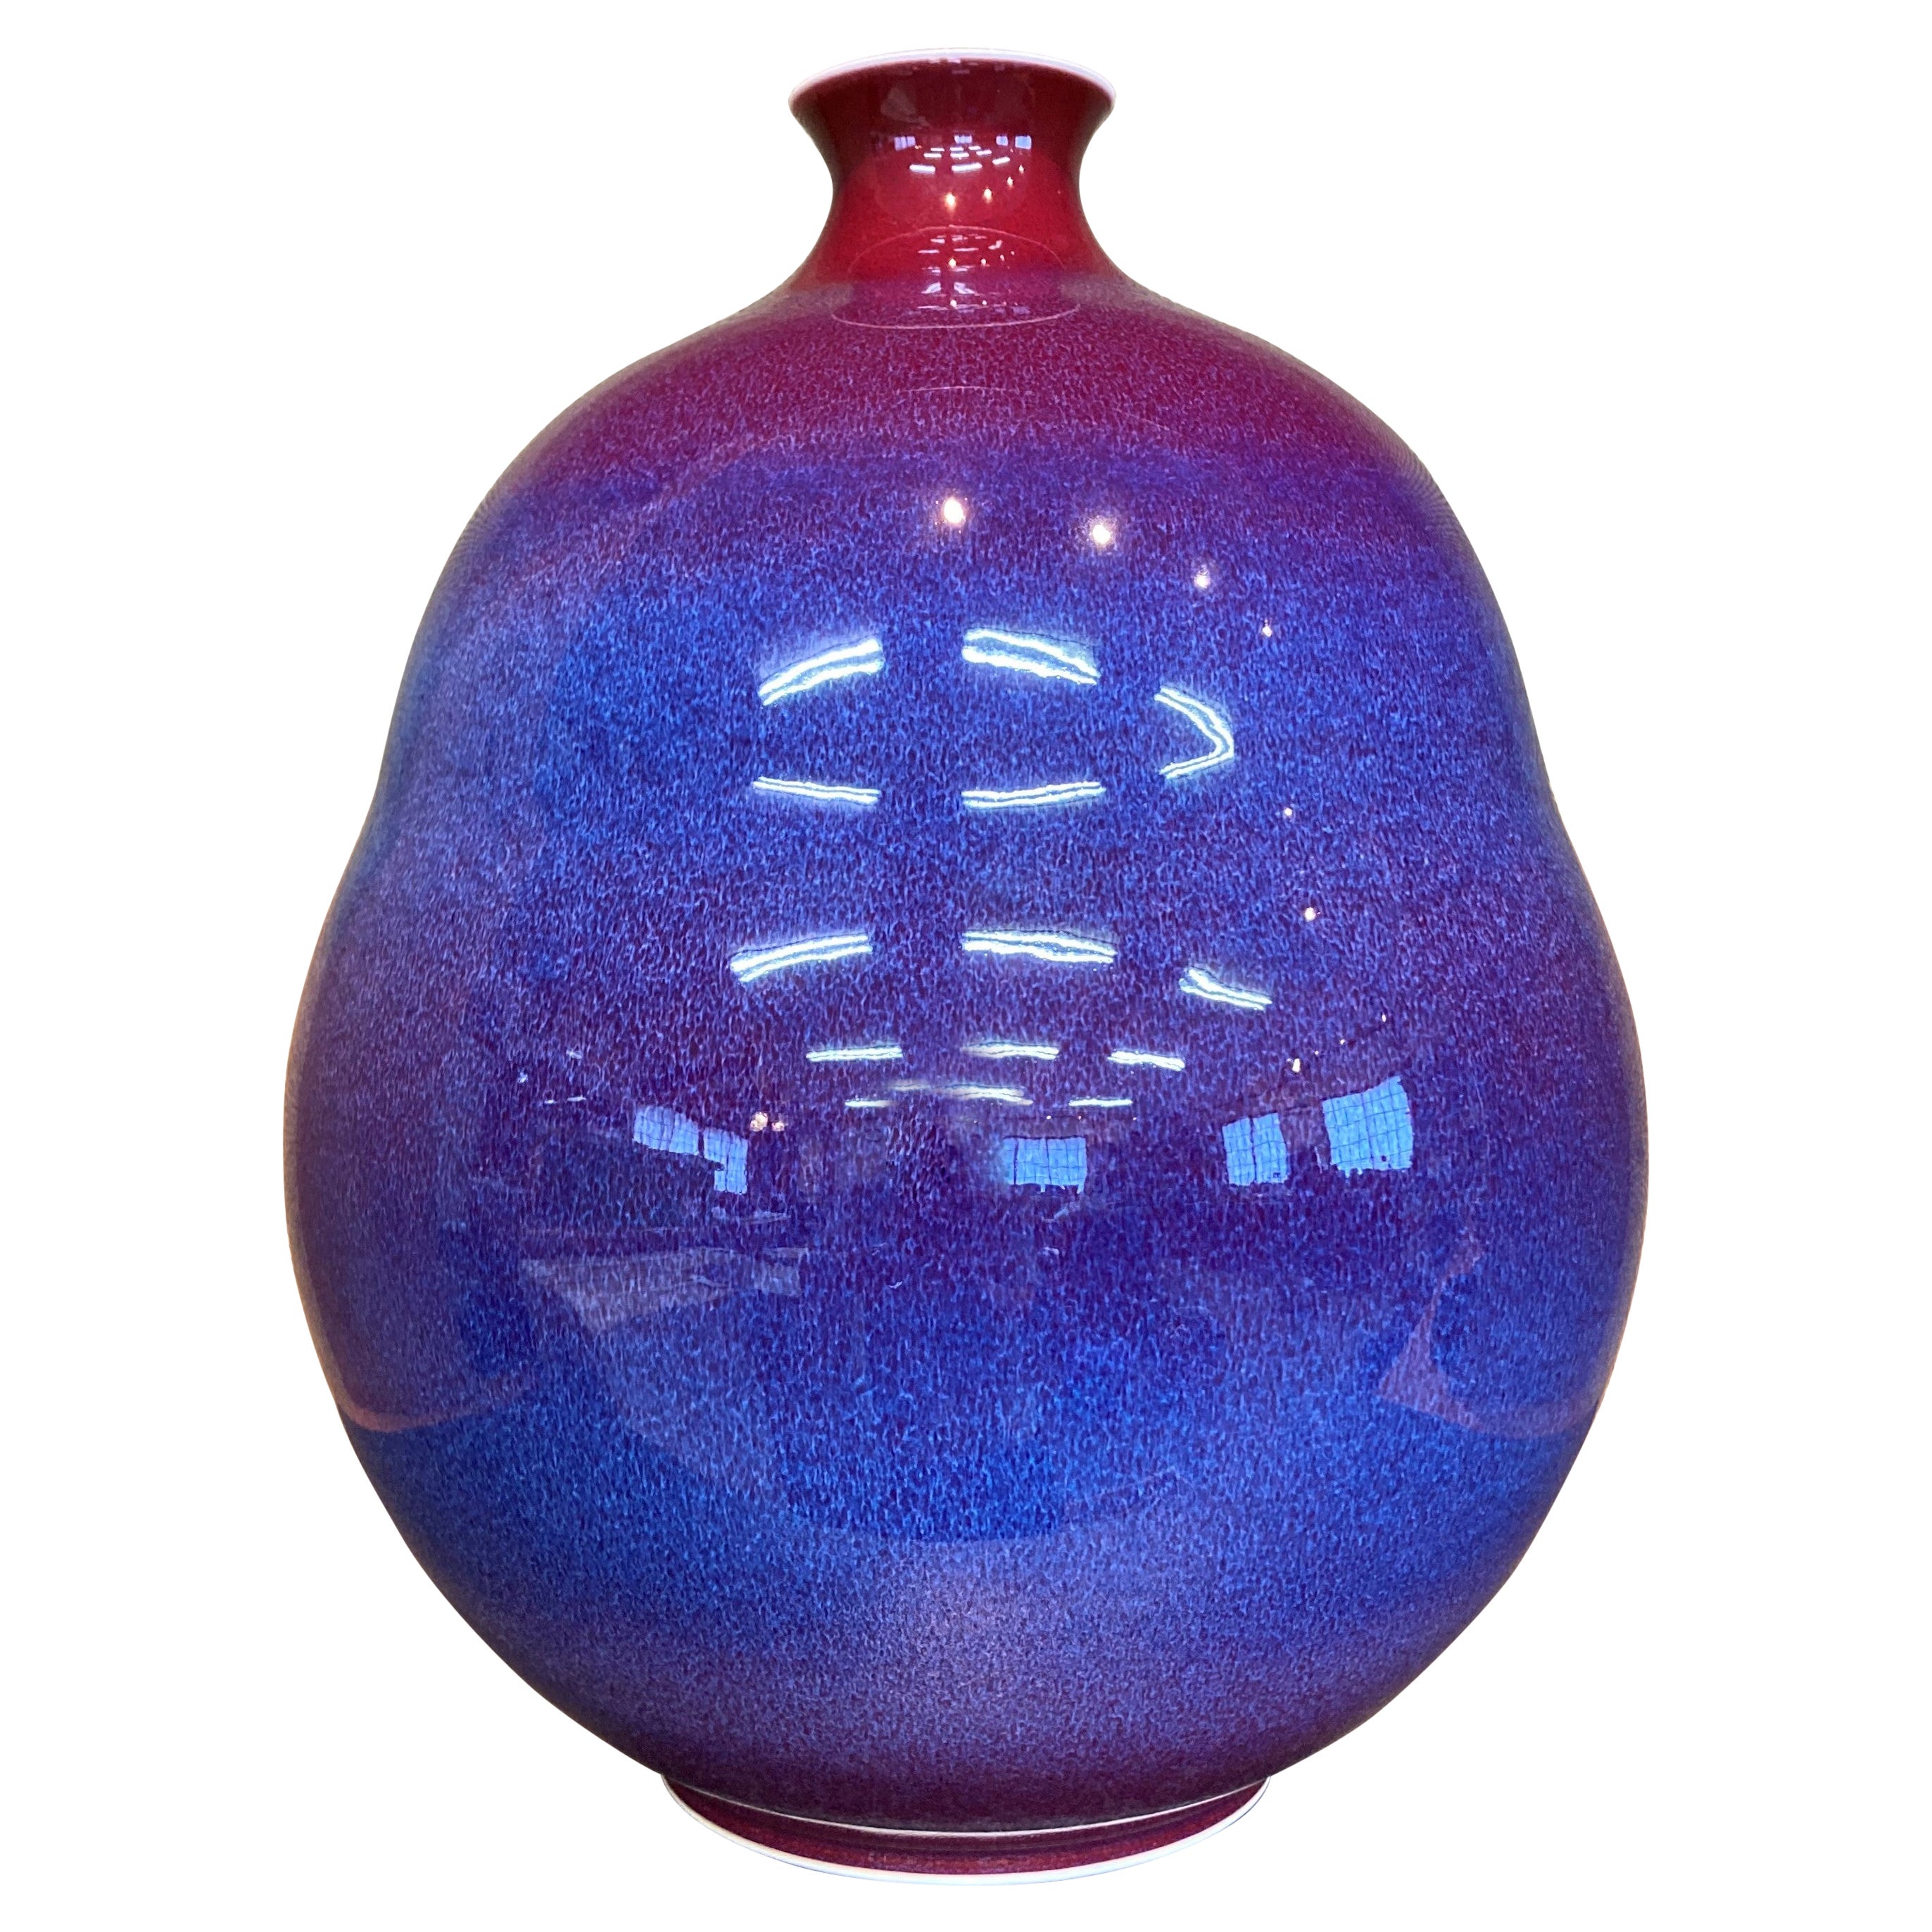 Japanese Contemporary Red and Blue Hand-Glazed Porcelain Vase by Master Artist For Sale